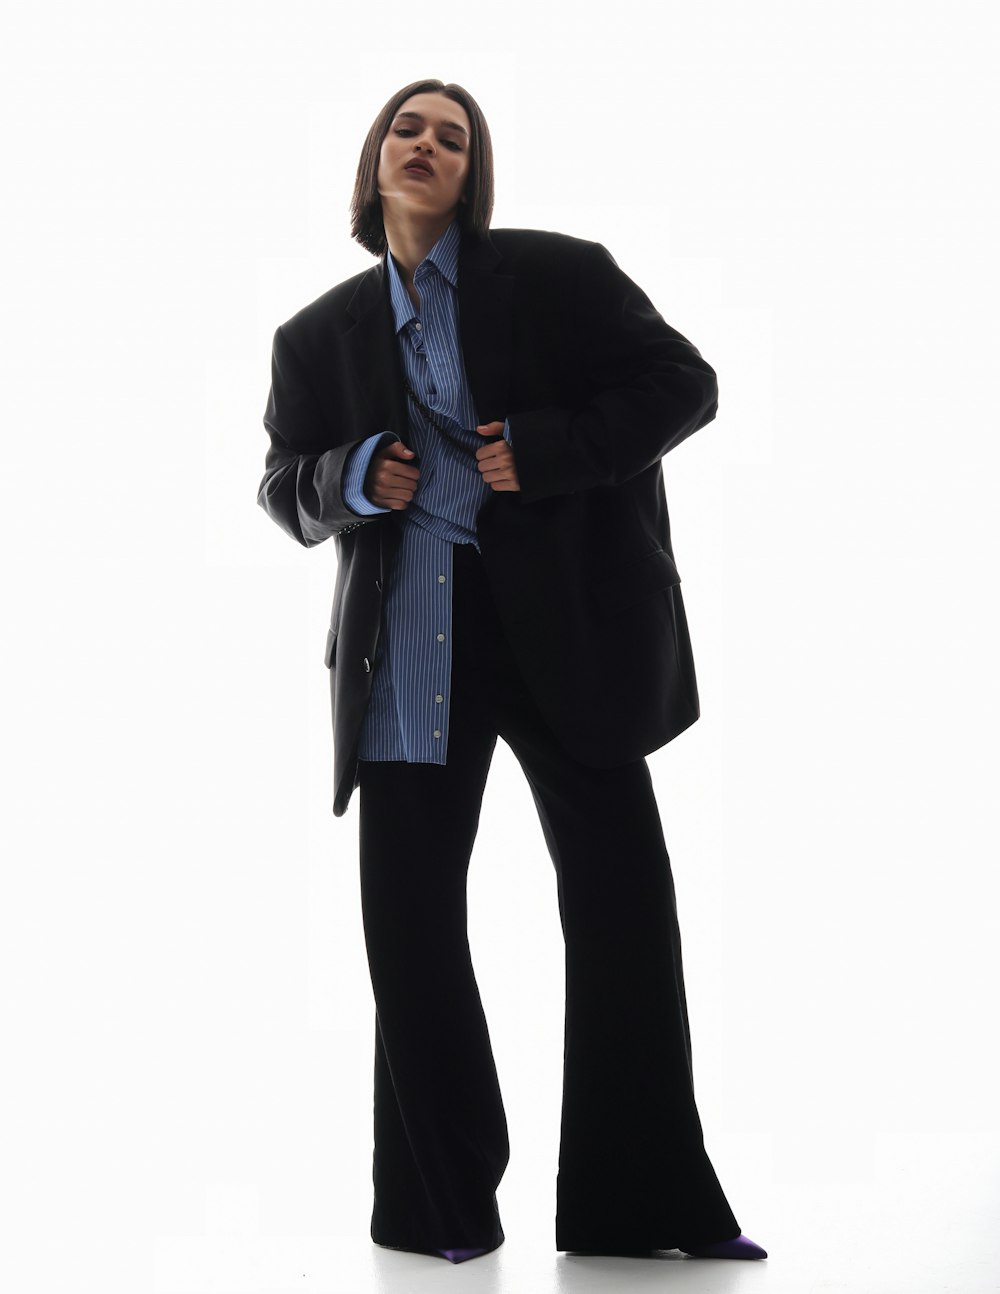 a man in a suit is posing for a picture